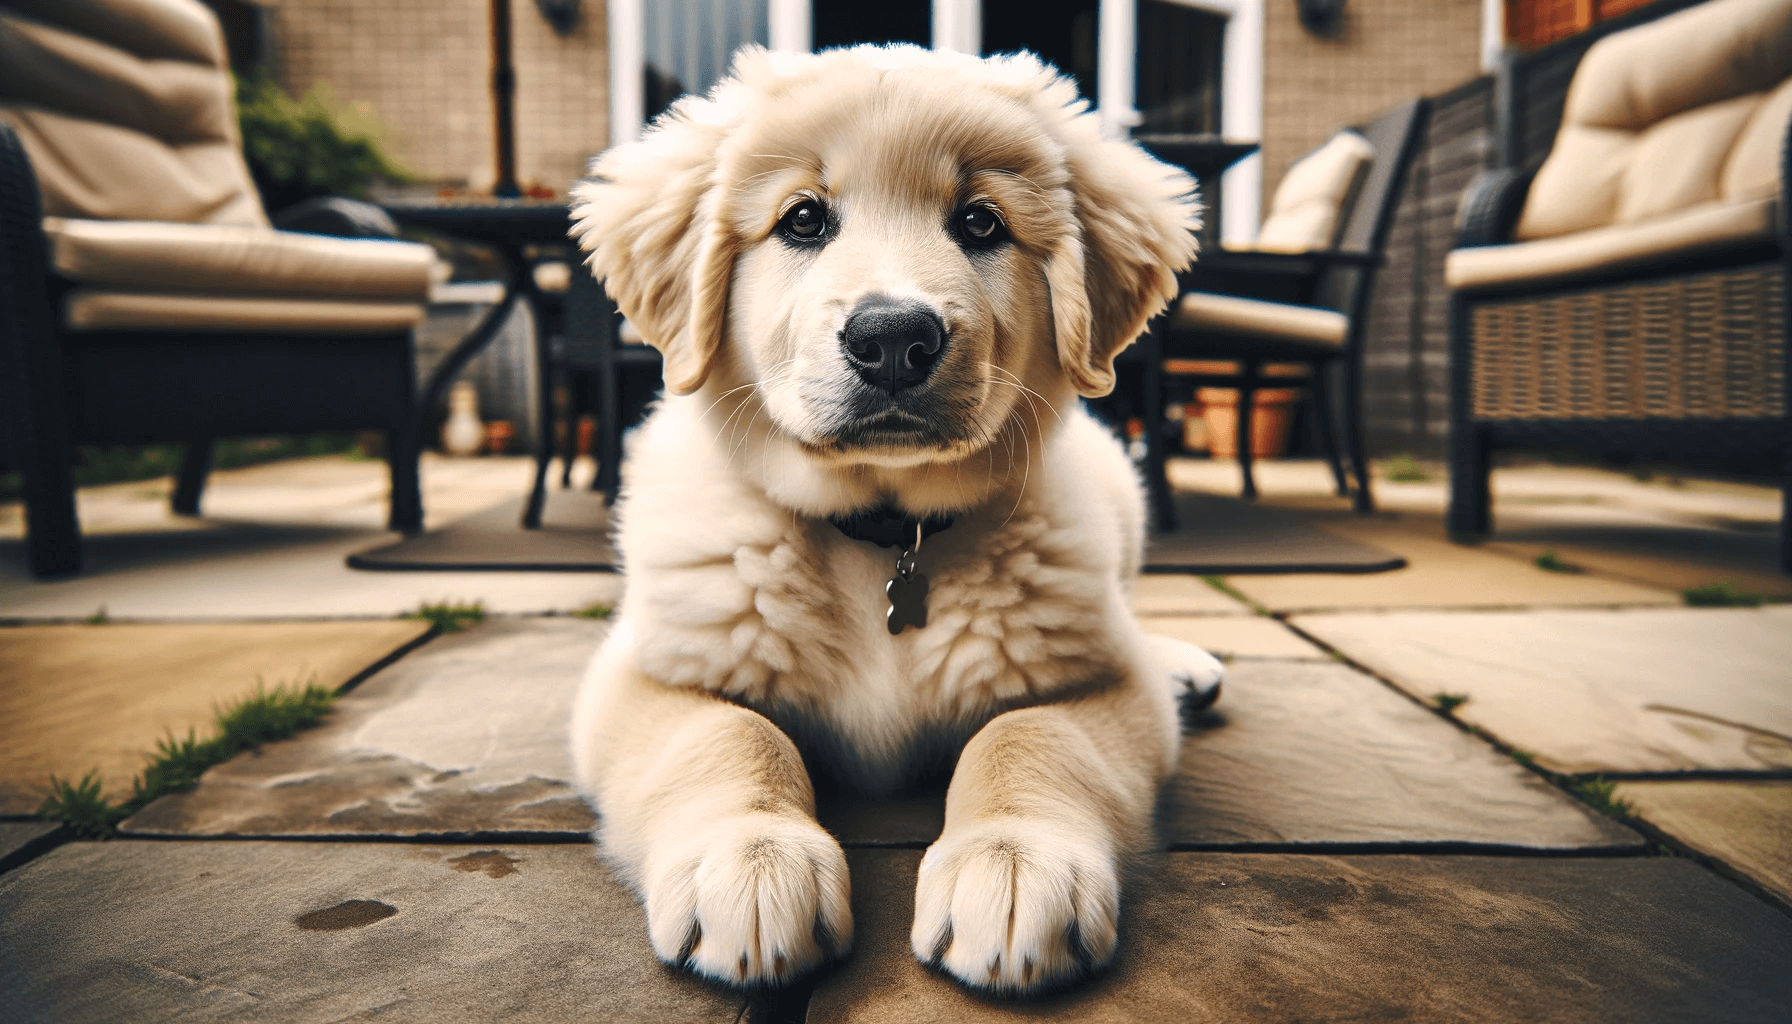 A Pyrenees Lab Mix puppy sits on a patio, gazing directly into the camera with an endearing and inquisitive look. It has a soft, fluffy coat of light